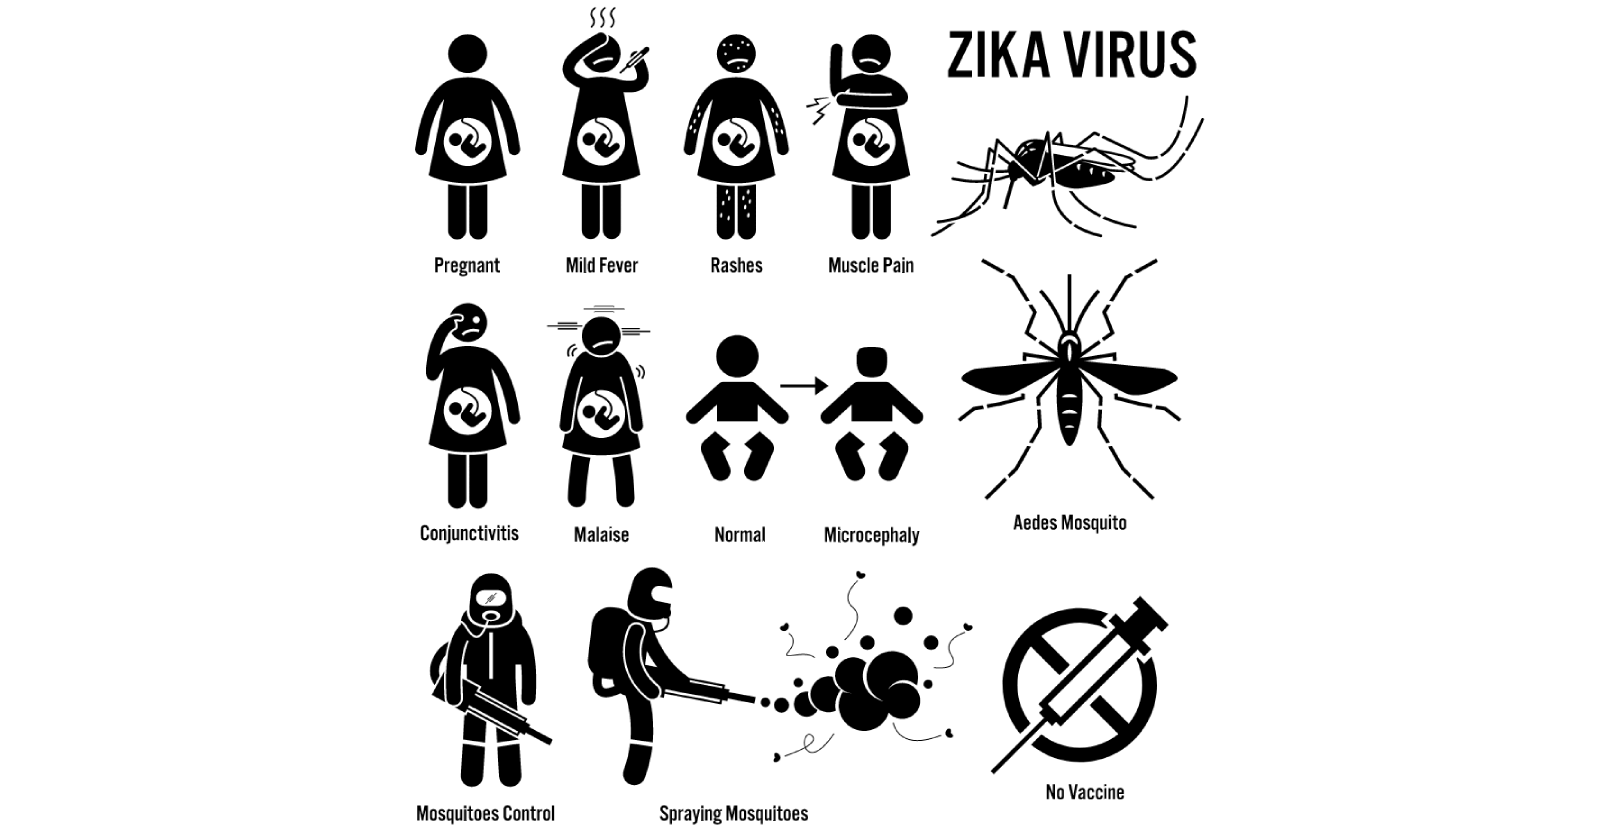 Overview of Zika Virus: Symptoms, causes, and treatments